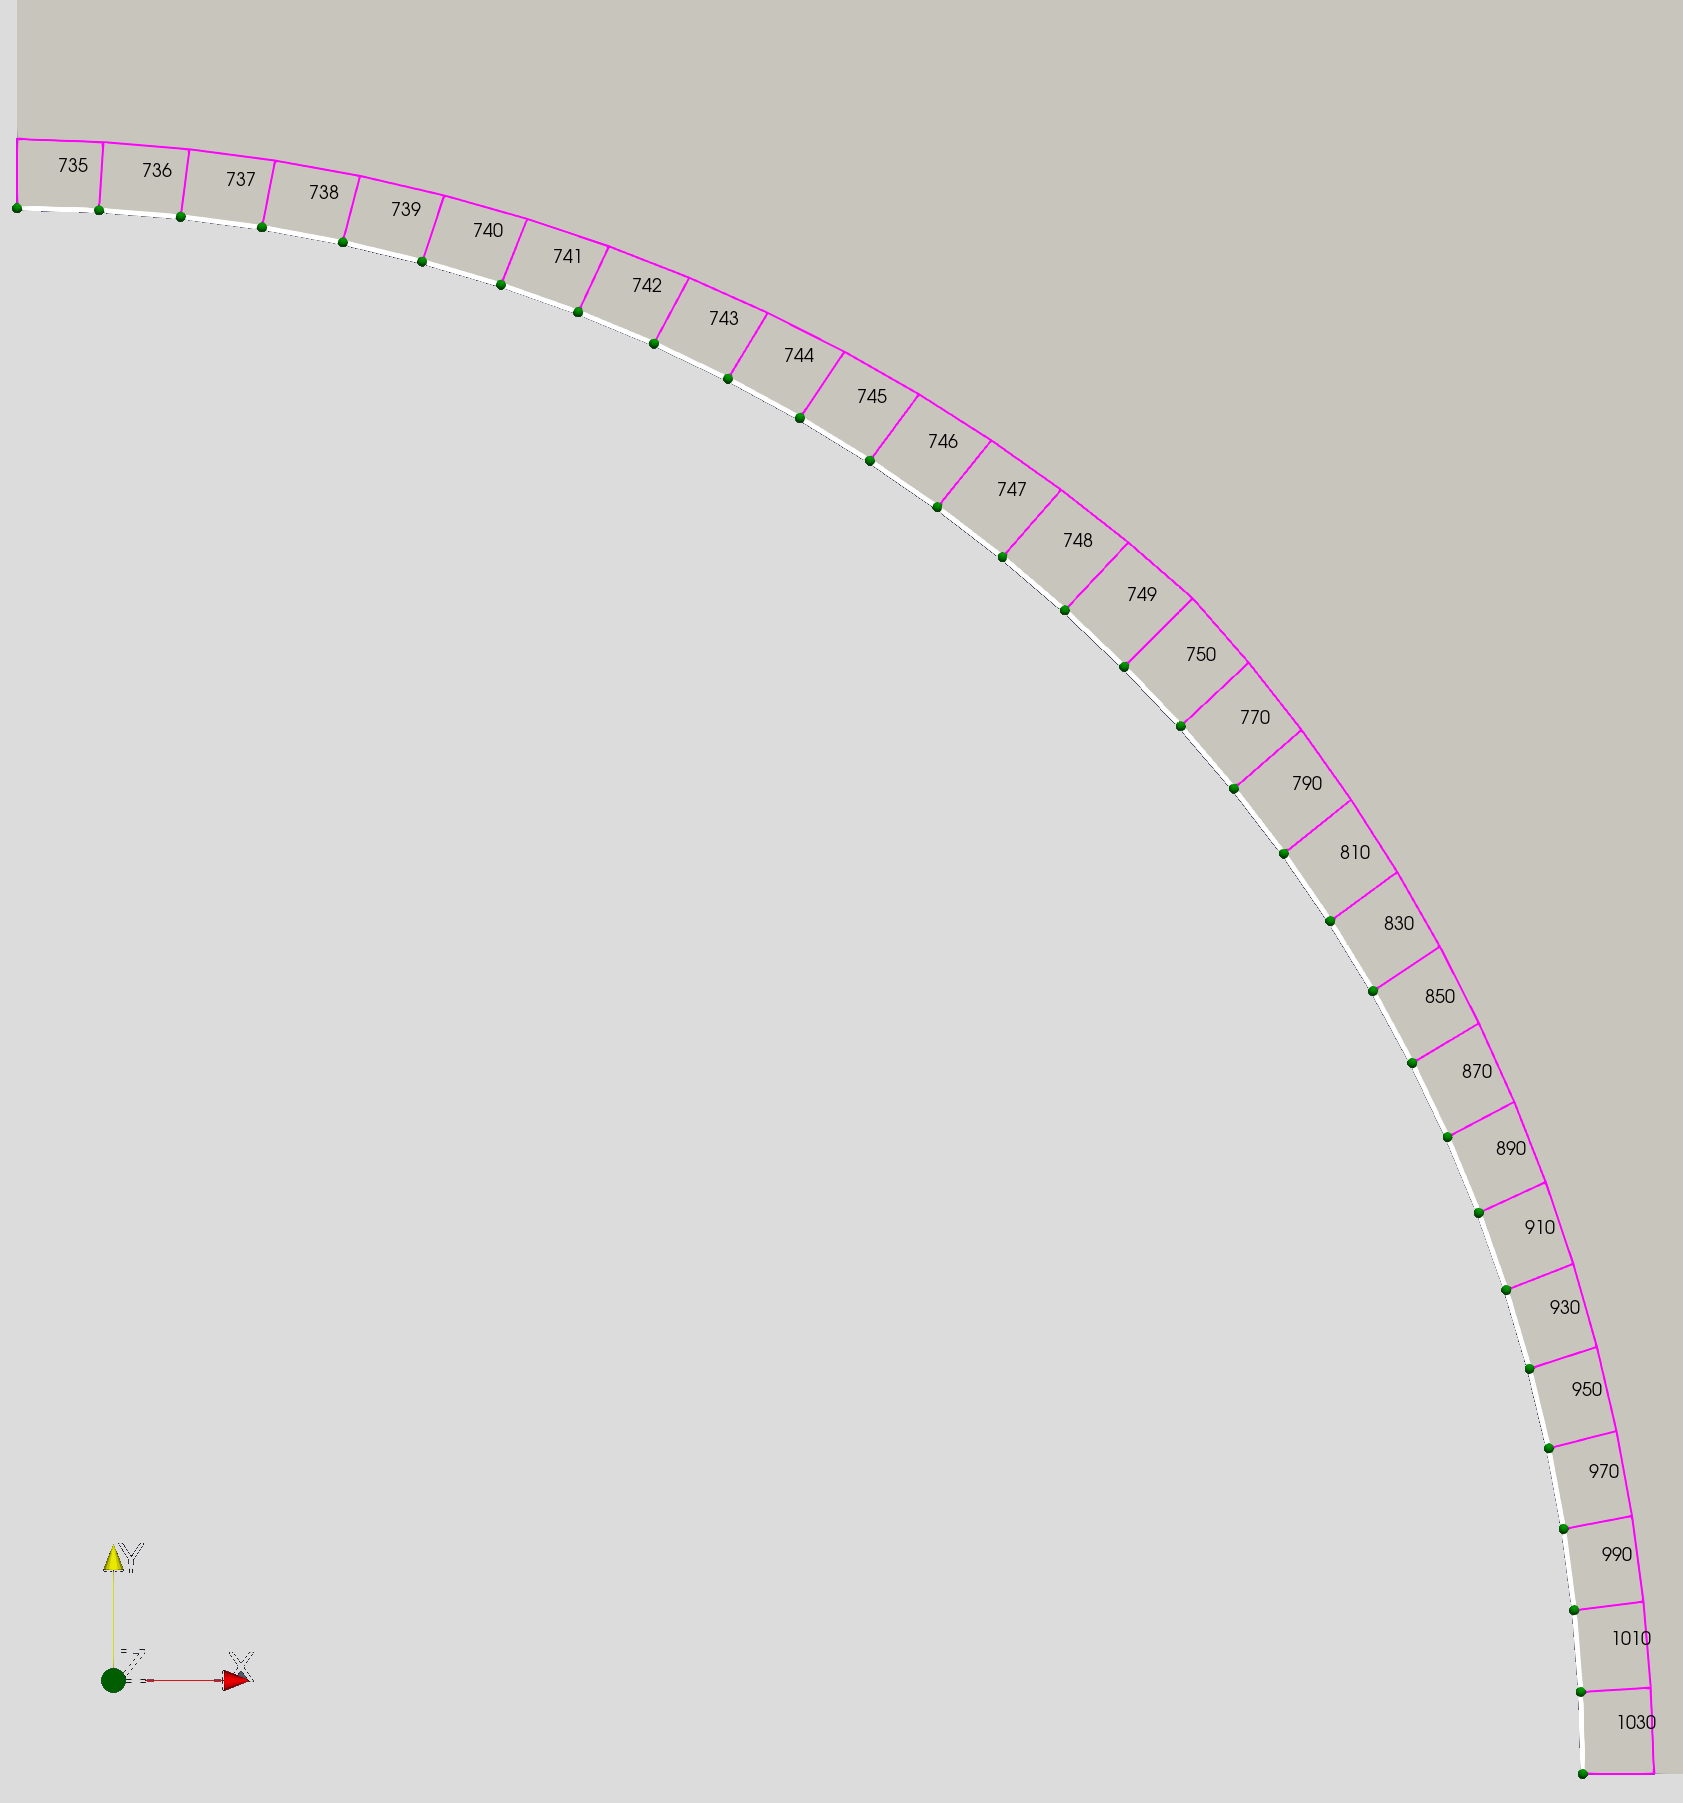 a part of the &lsquo;bulk&rsquo; mesh with boundary element numbers